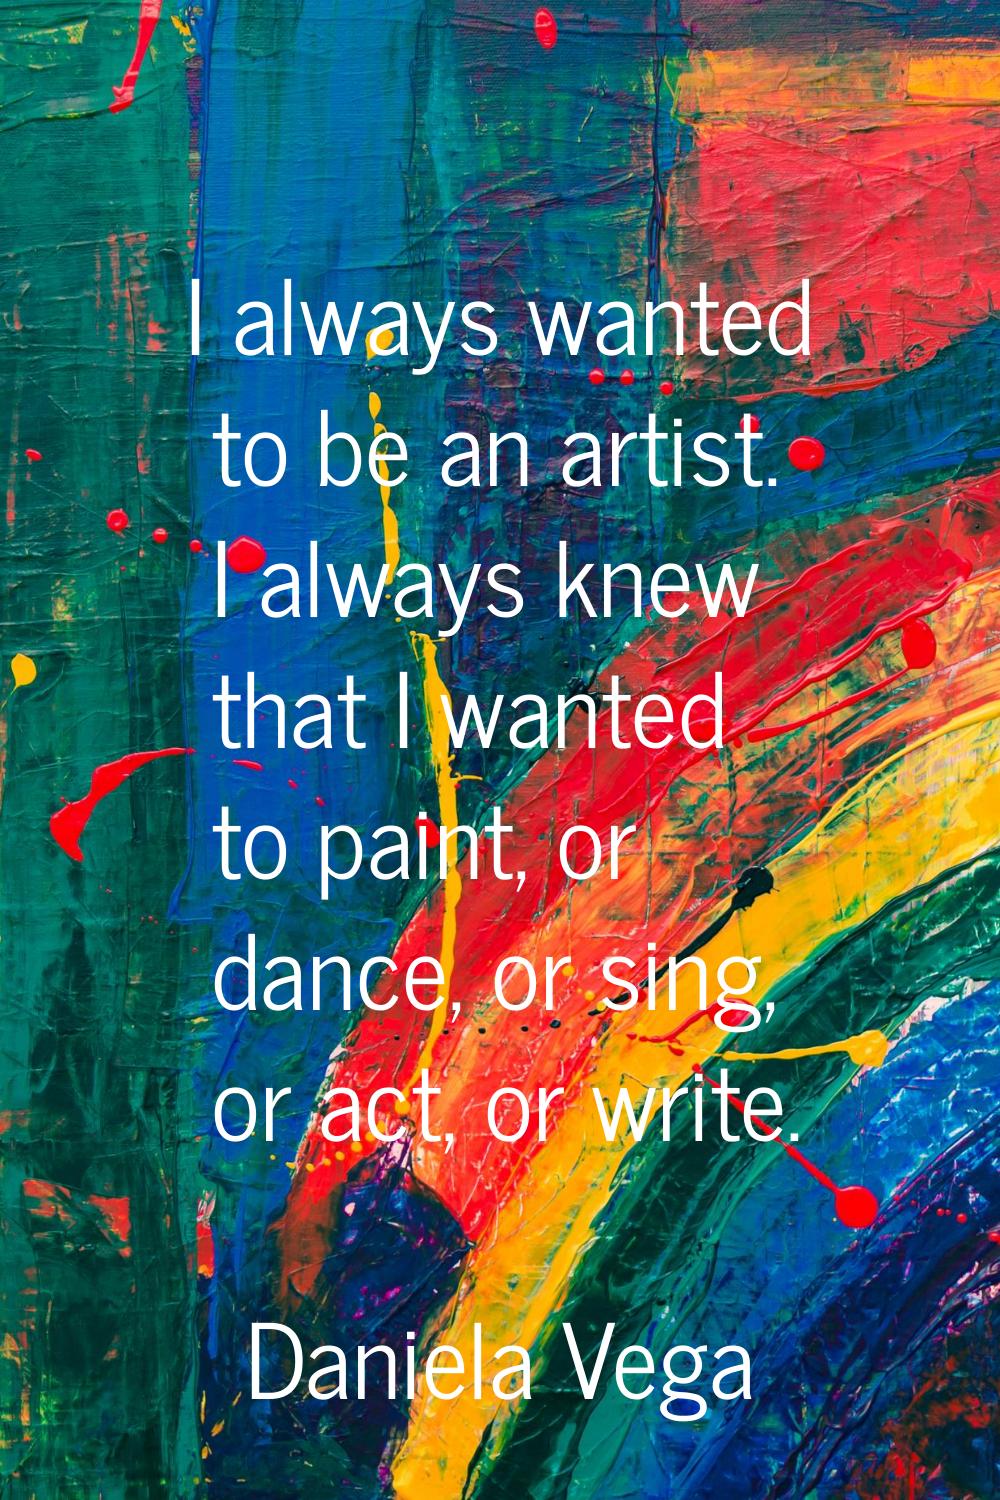 I always wanted to be an artist. I always knew that I wanted to paint, or dance, or sing, or act, o